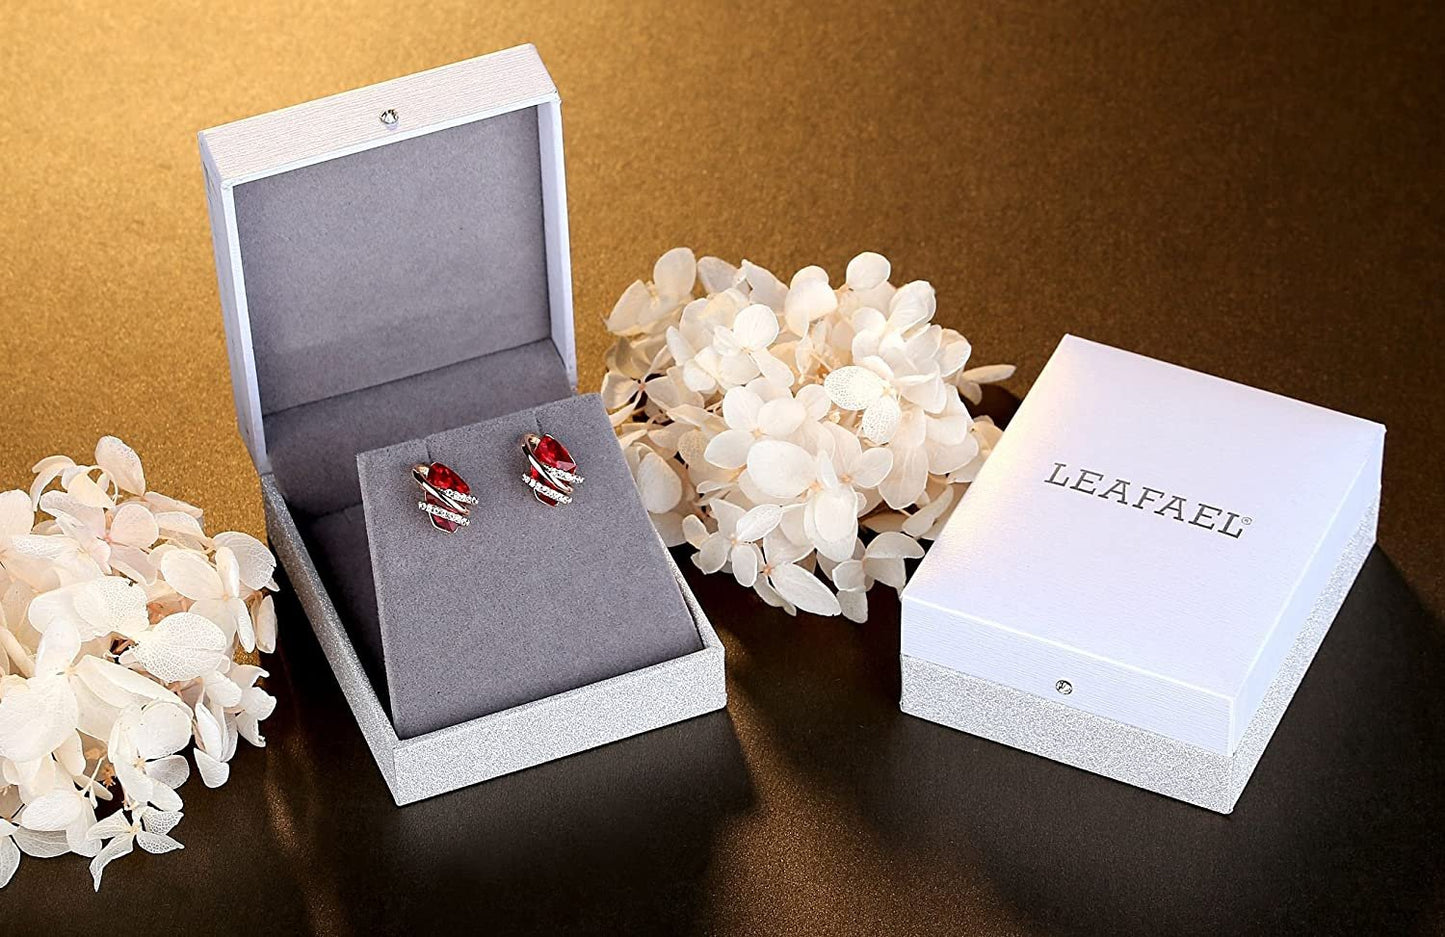 Leafael Wish Stone Stud Earrings with Birthstone Crystals, 18K Rose Gold Plated or Silver-tone